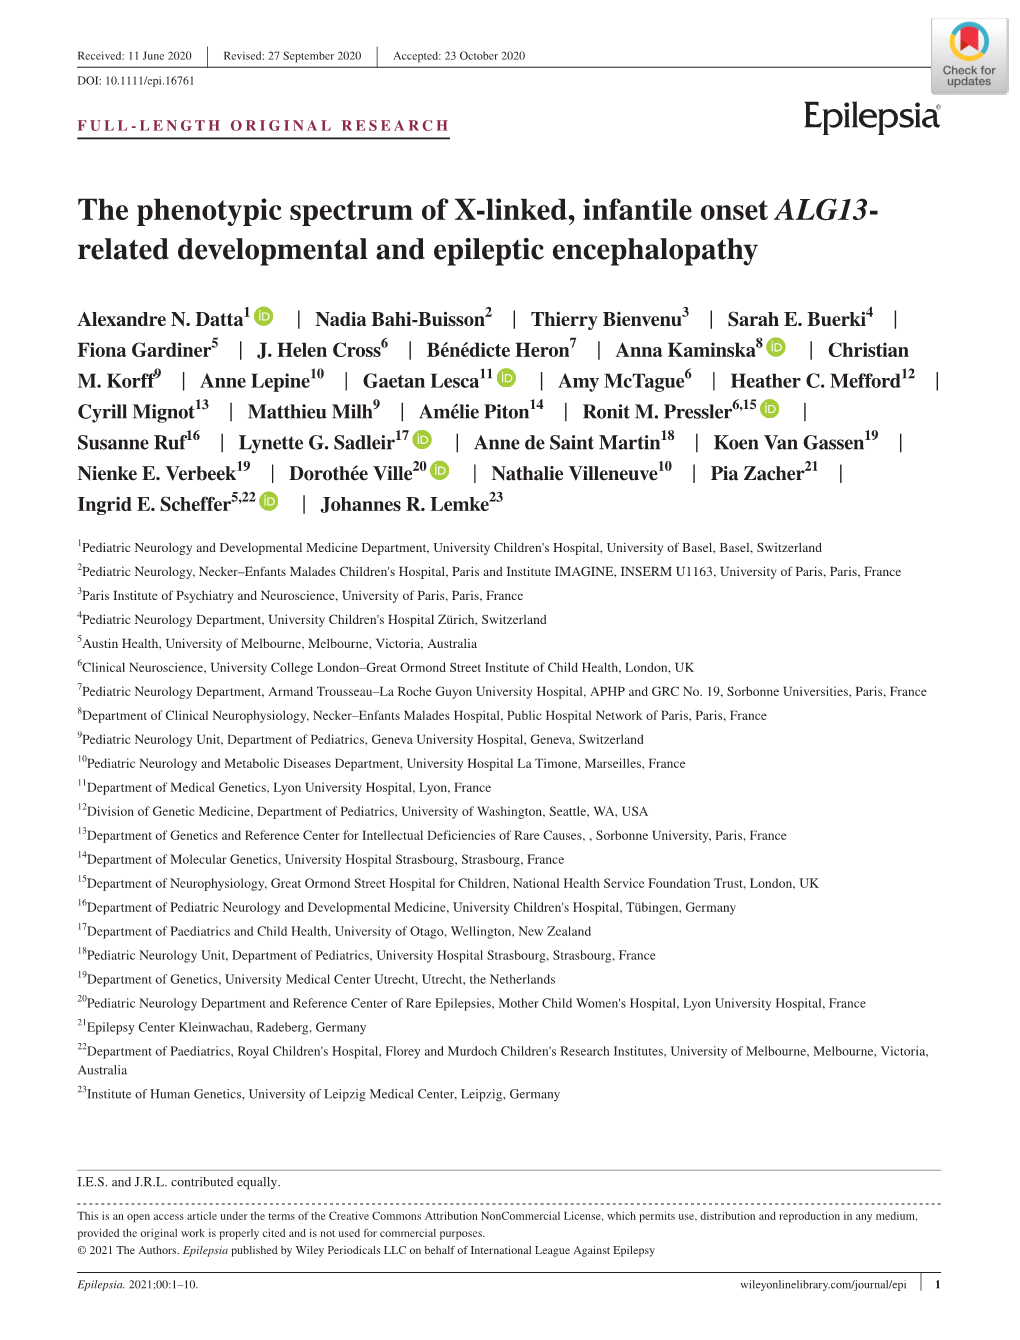 The Phenotypic Spectrum of X‐Linked, Infantile Onset ALG13‐Related